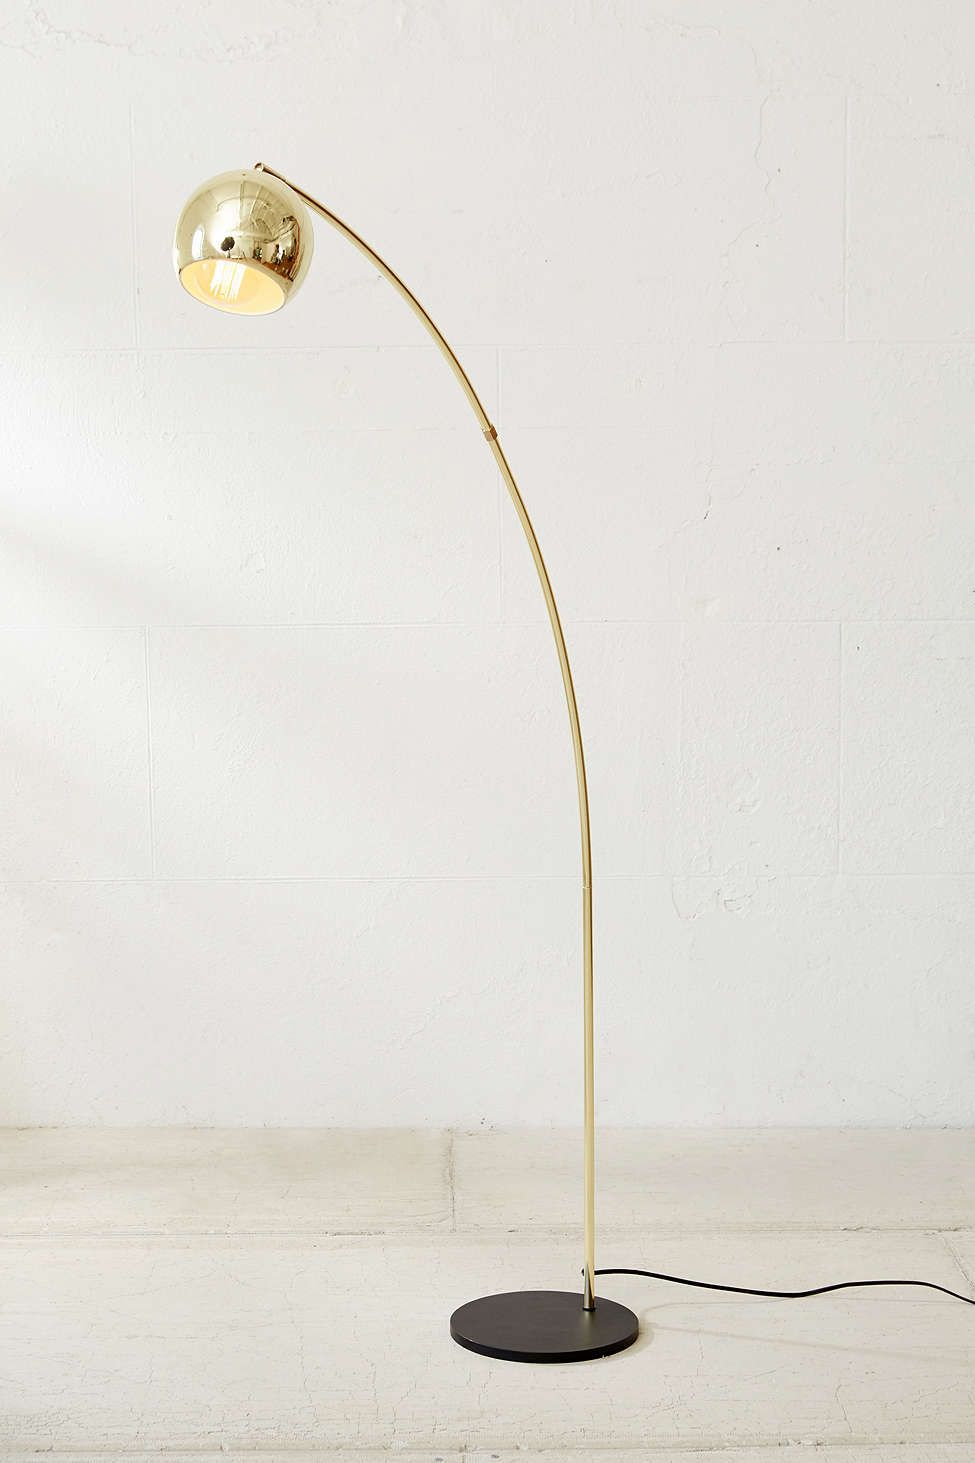 11 Arc Floor Lamps That Add Mod Influence To The Home pertaining to dimensions 975 X 1463